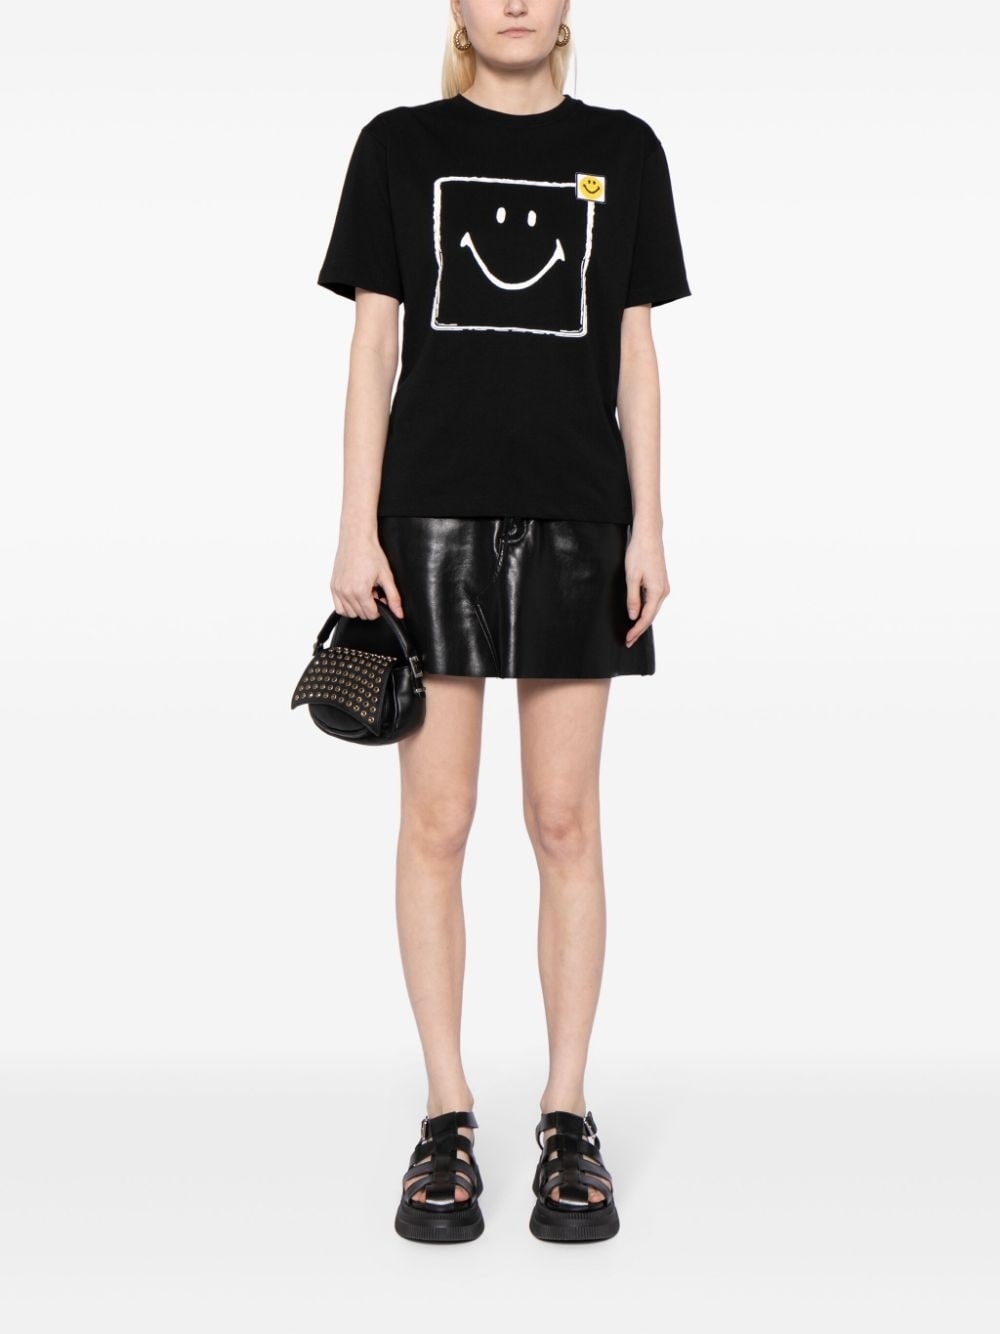 square smiley face-print T-shirt - 2